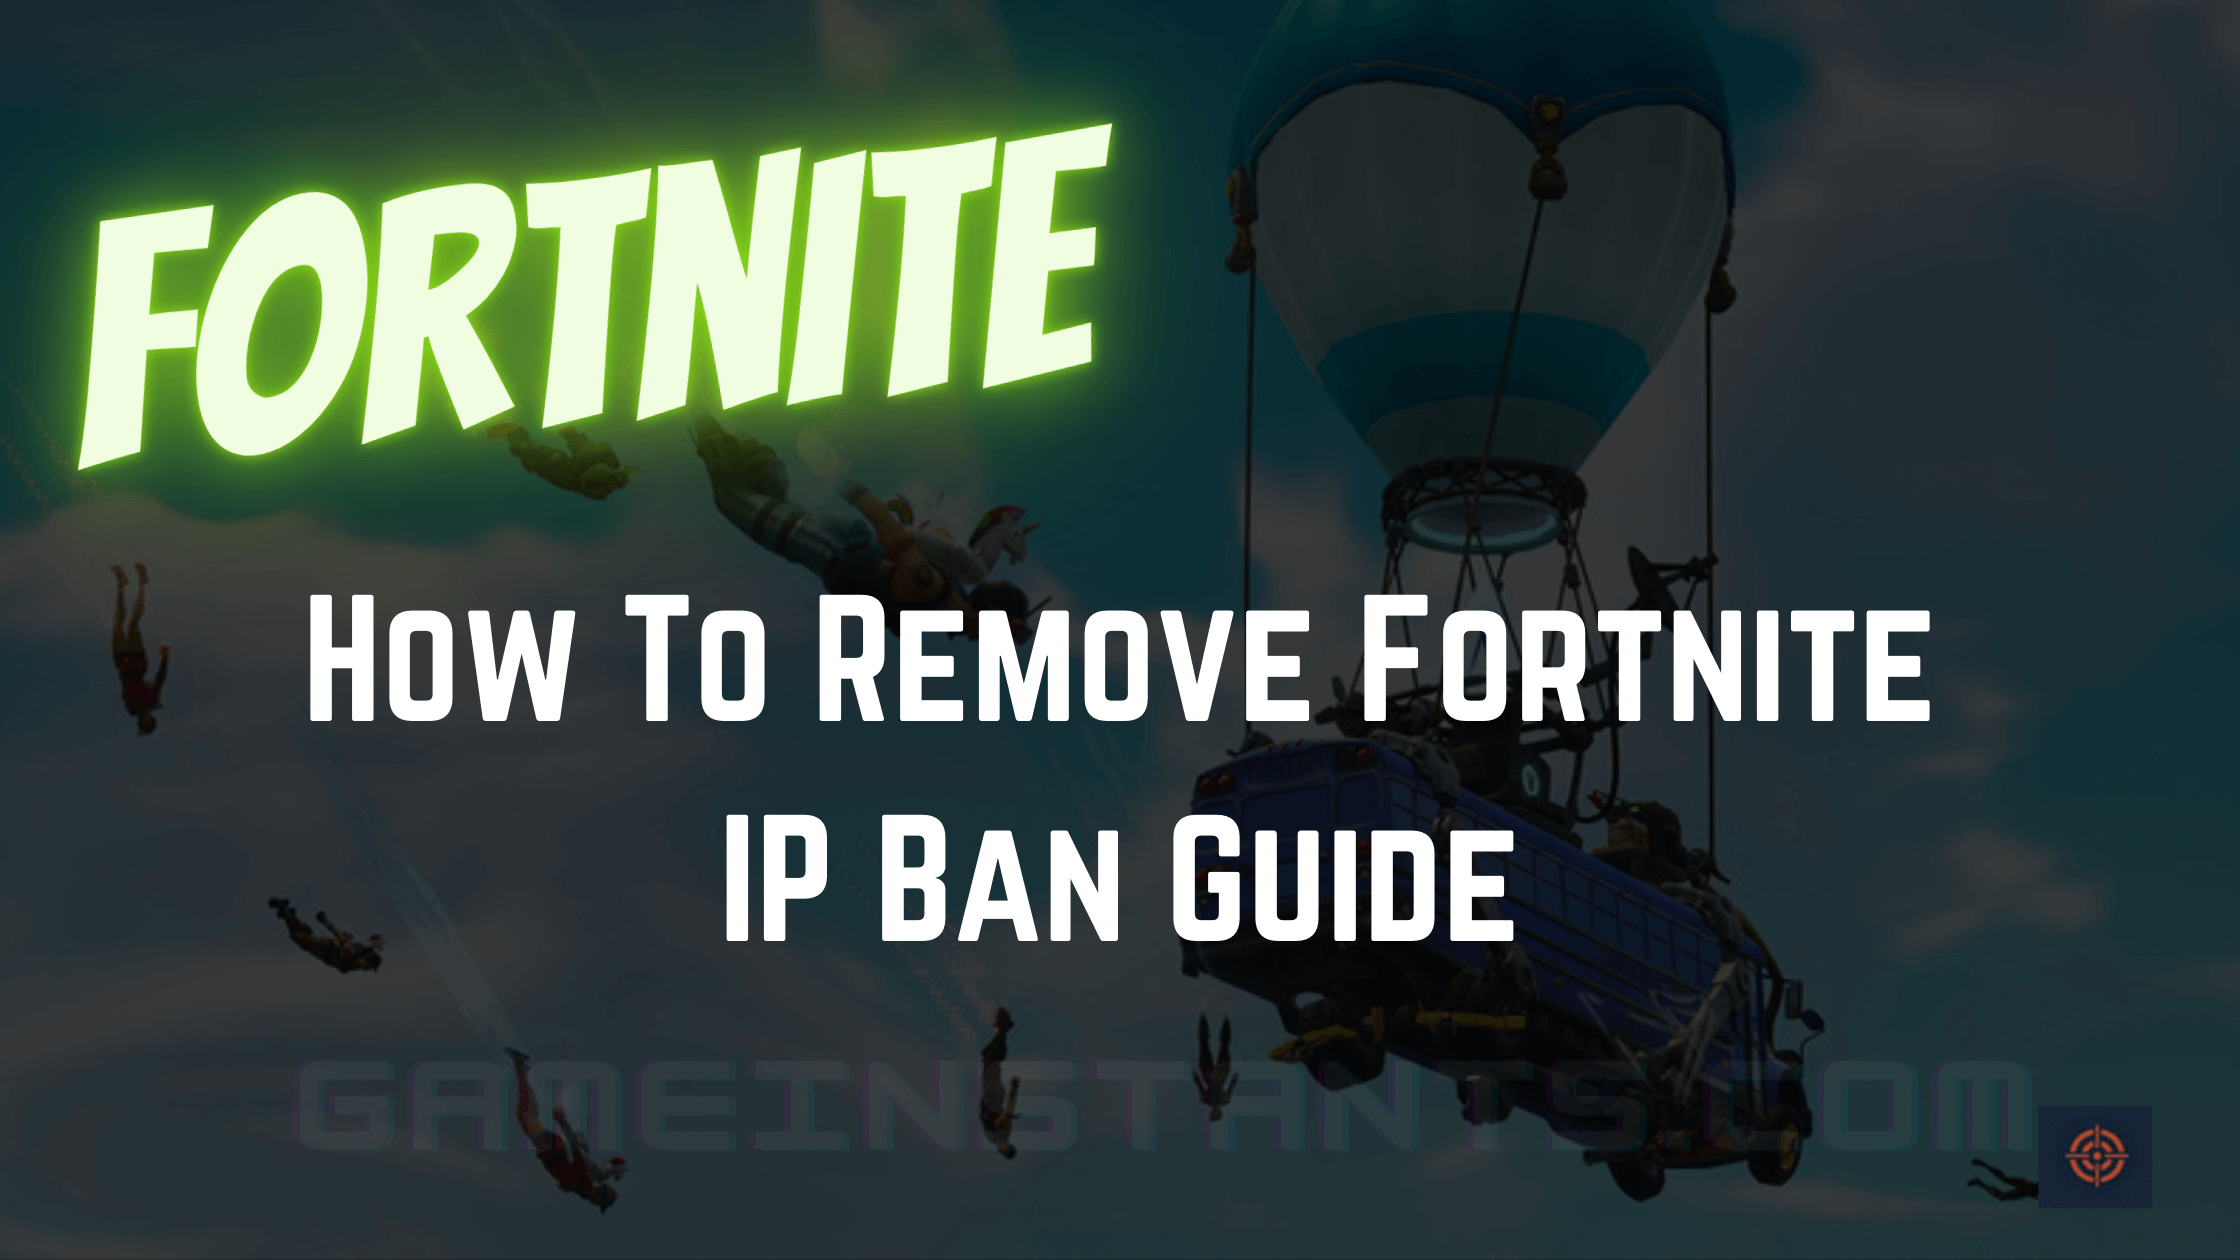 How To Remove Fortnite IP Ban Guide